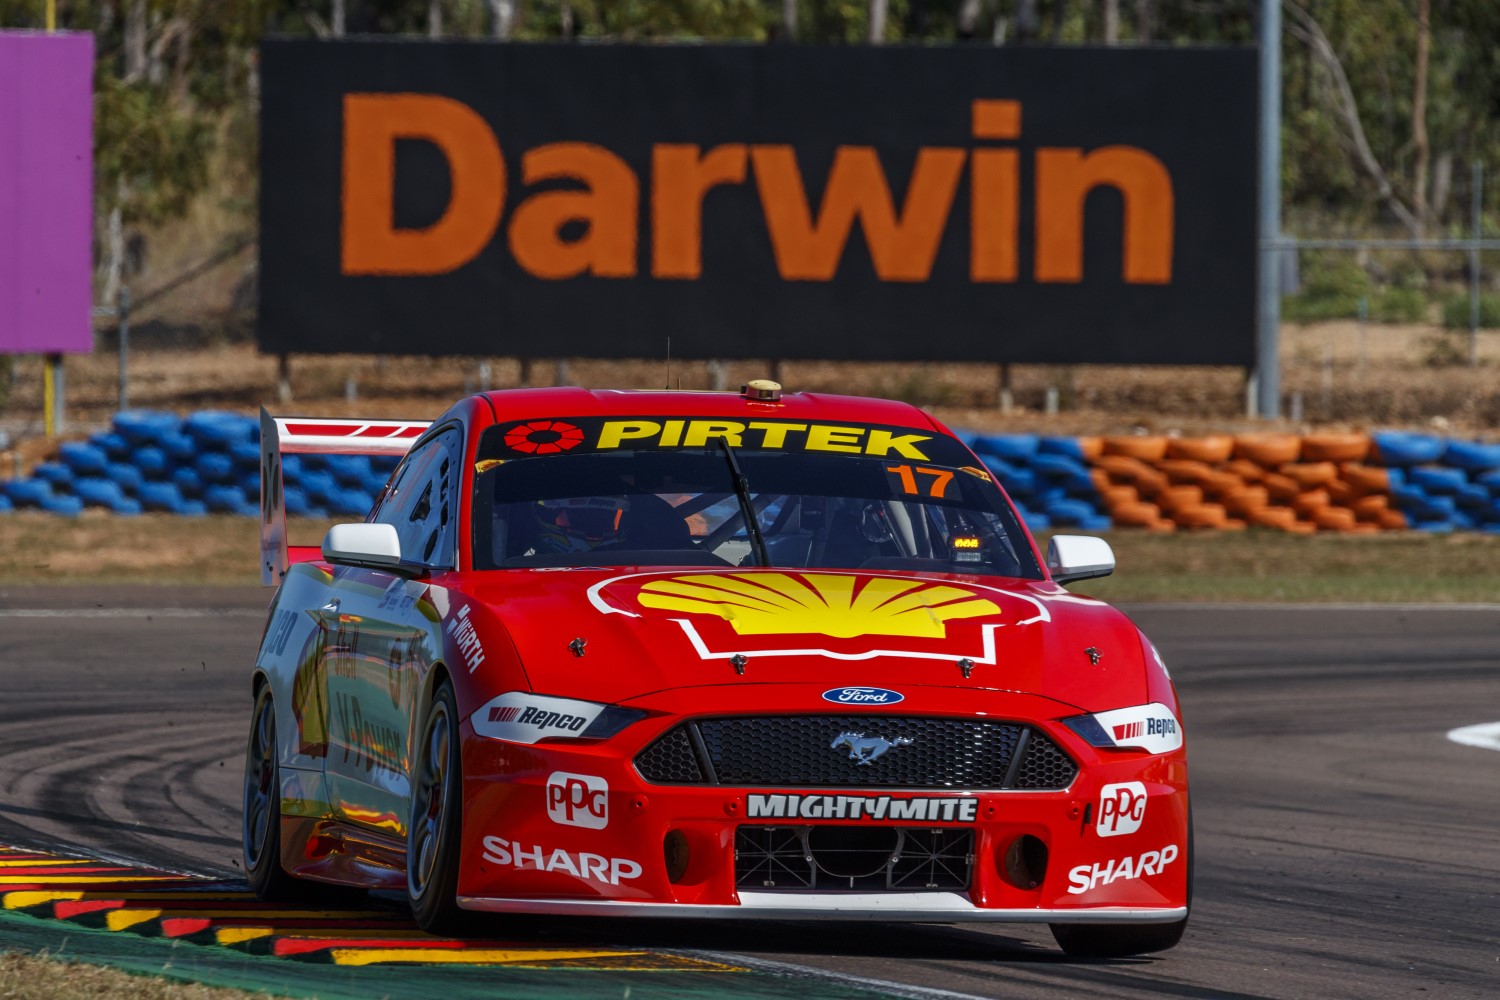 McLaughlin poised to win again